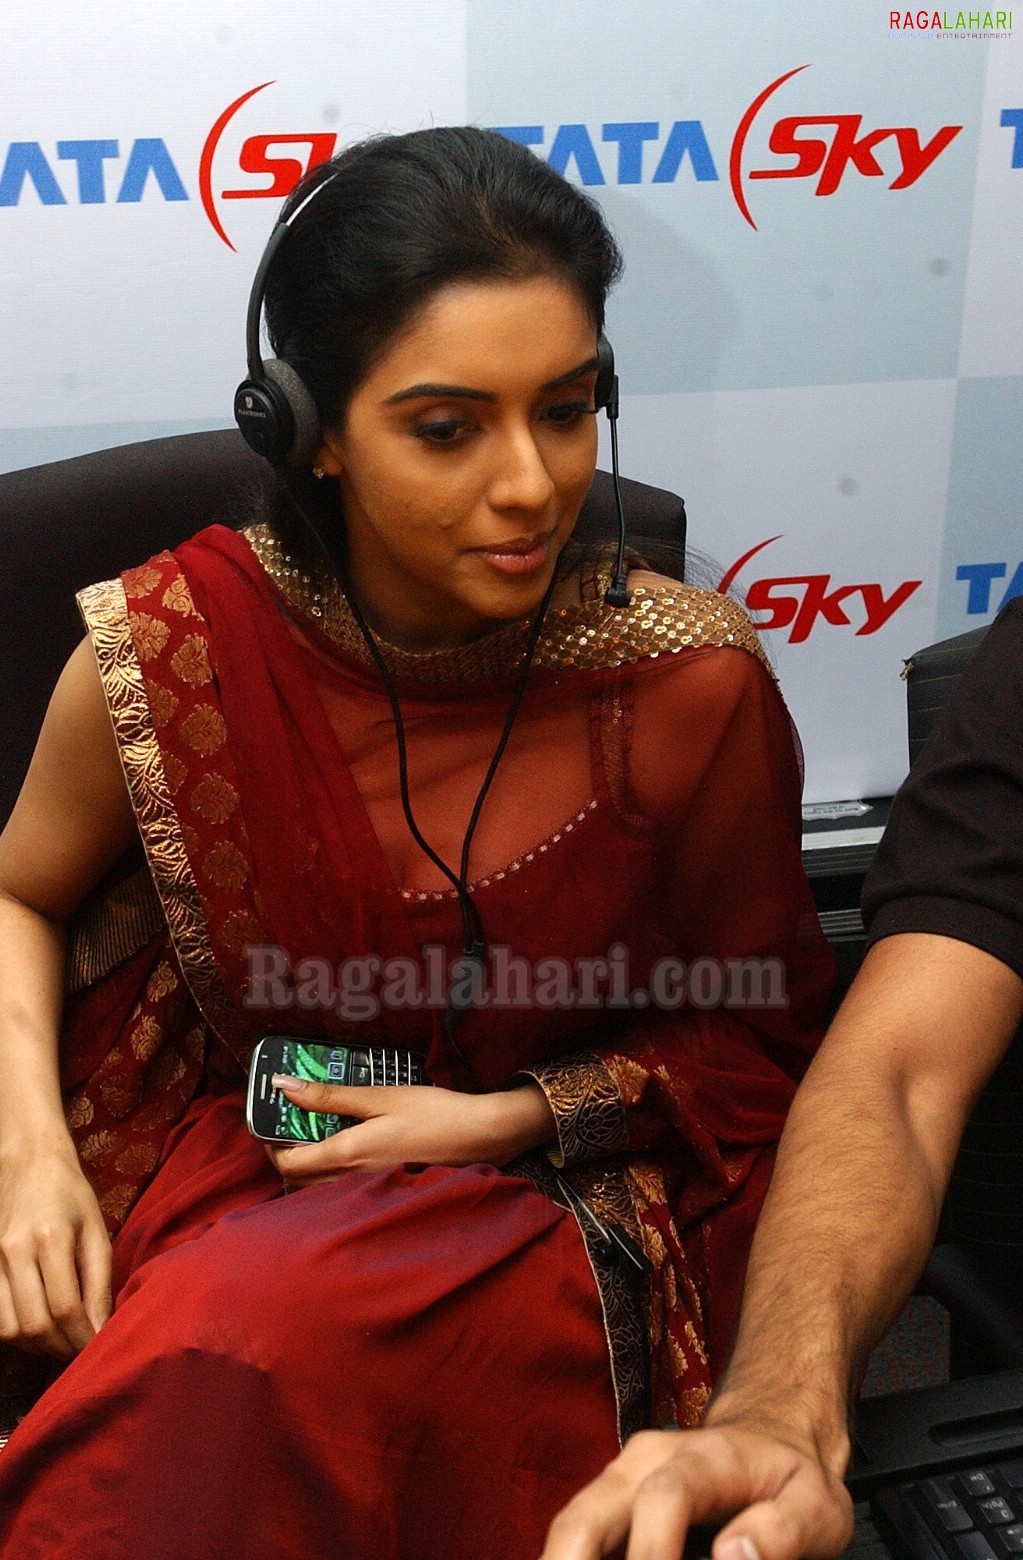 Asin at Tata Sky Promotional Event in Hyderabad